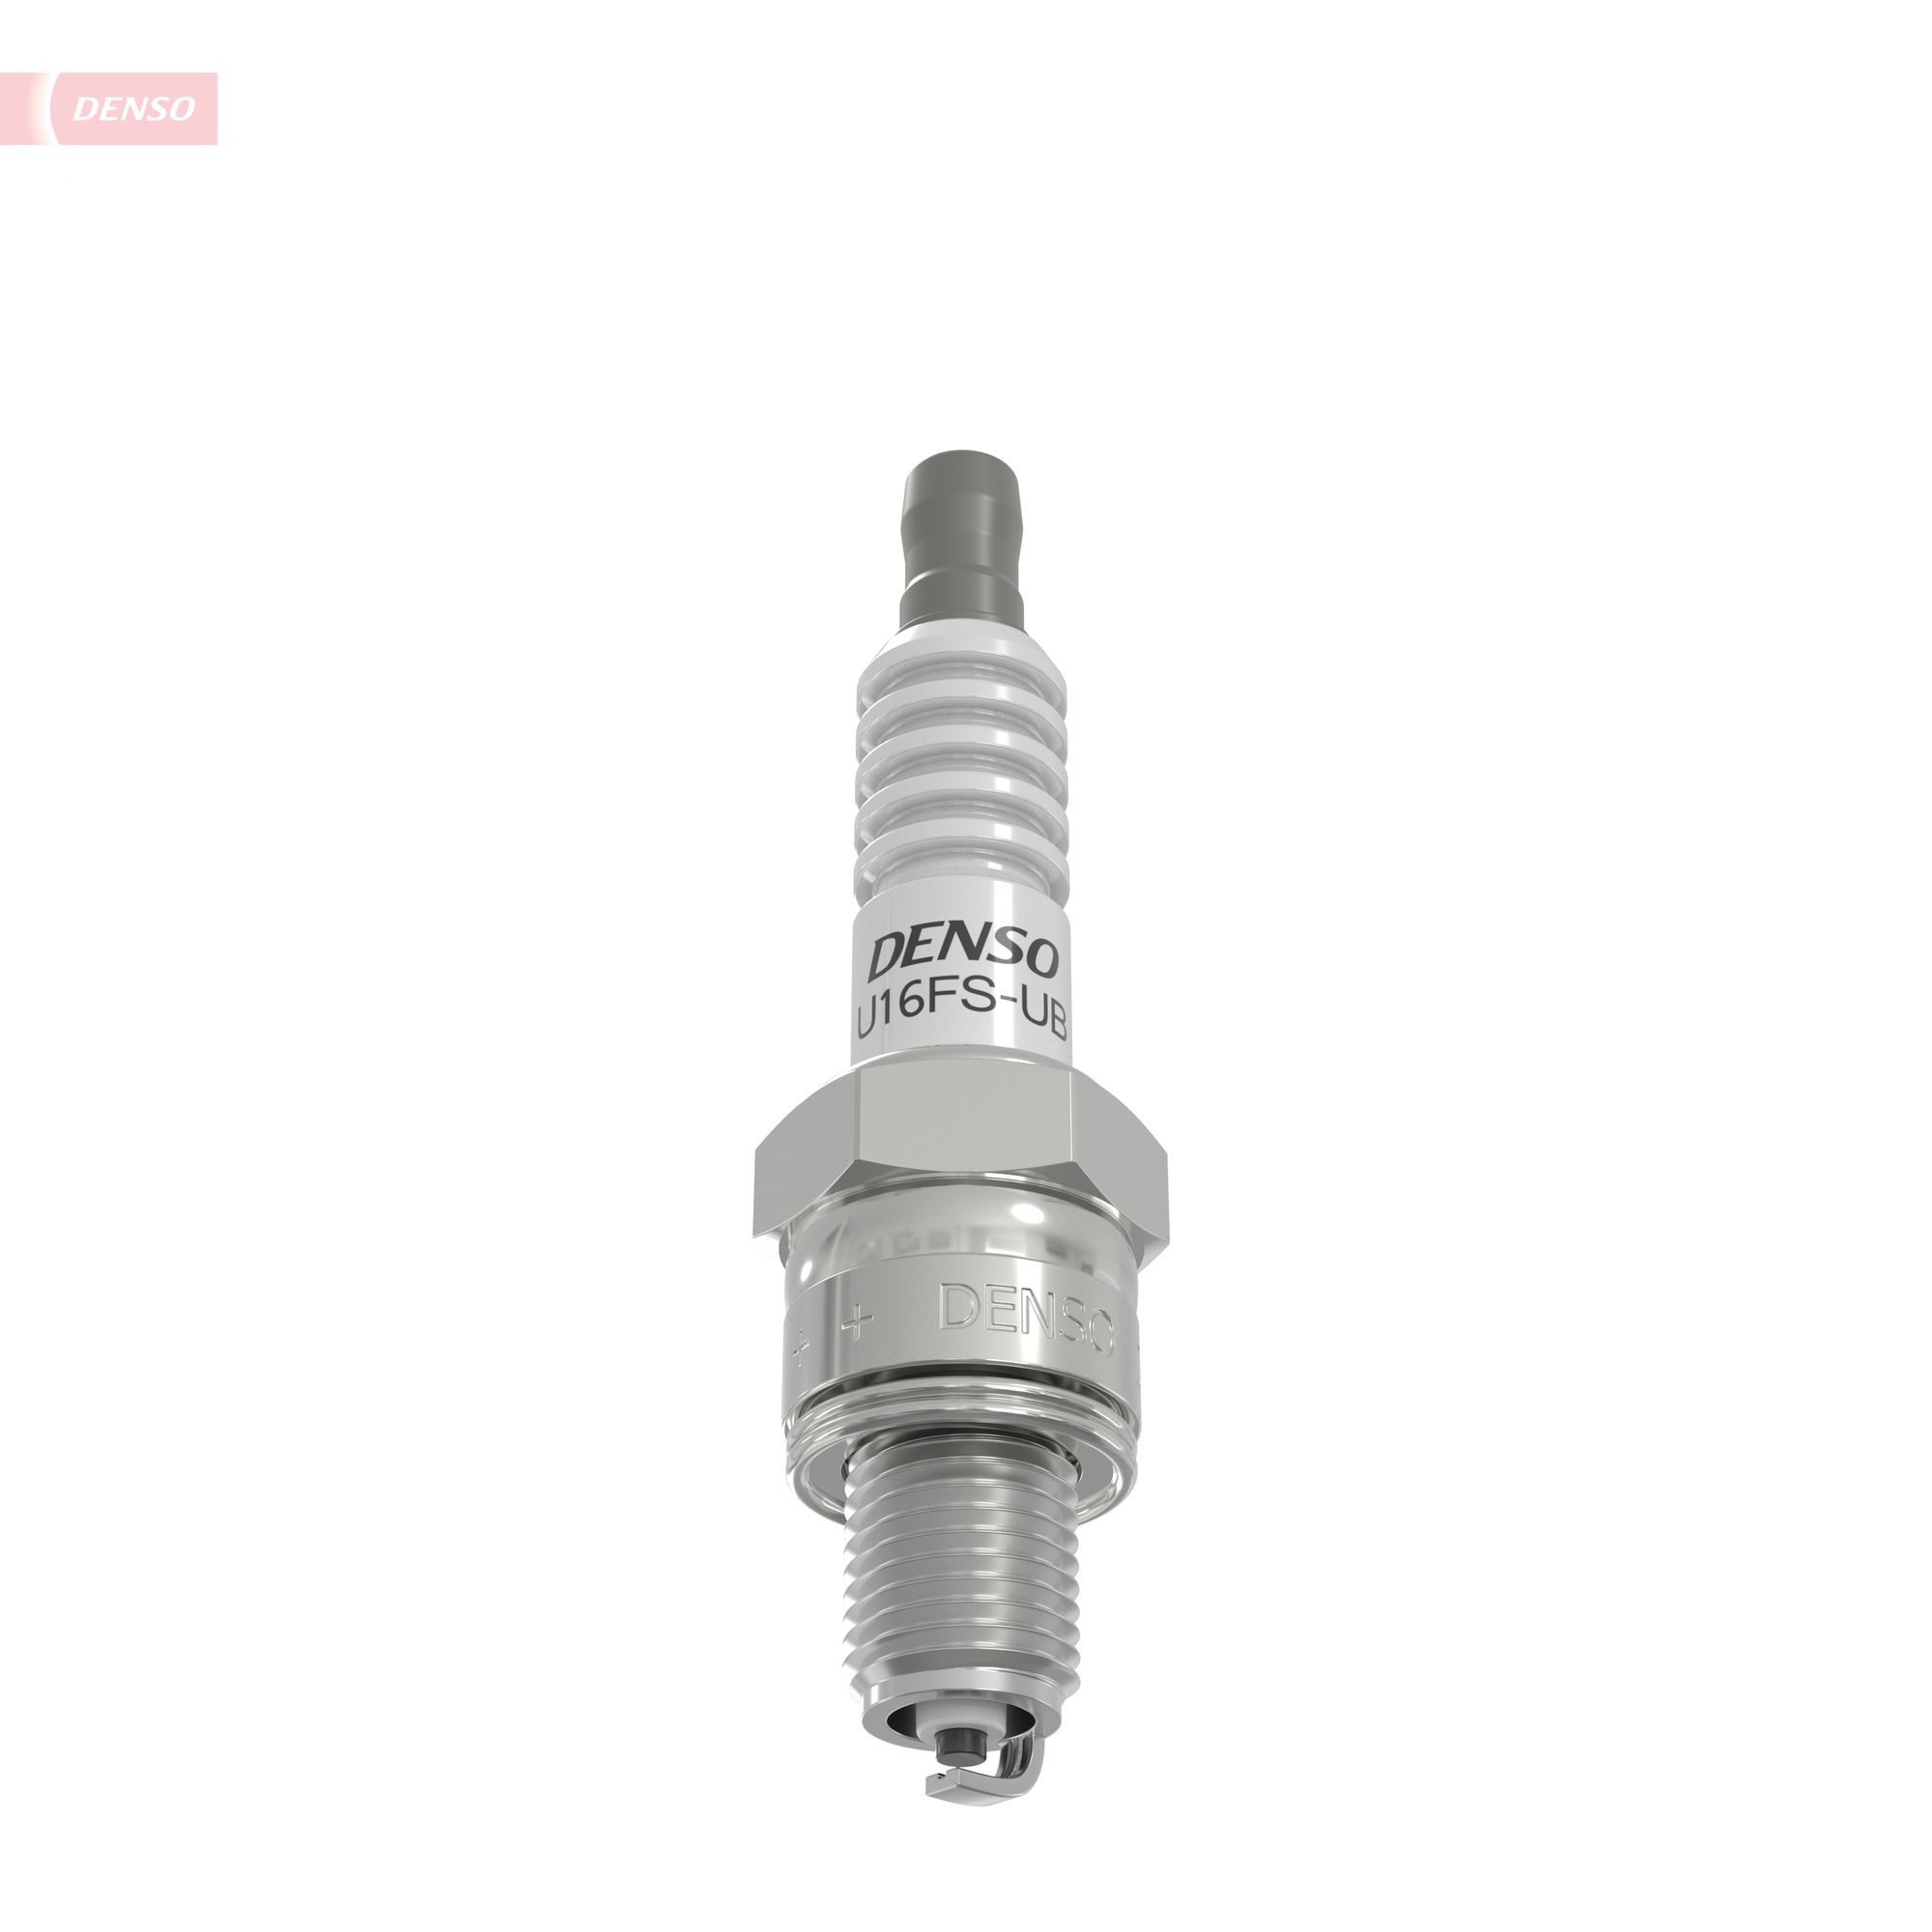 DENSO Spark plugs 6077 buy online